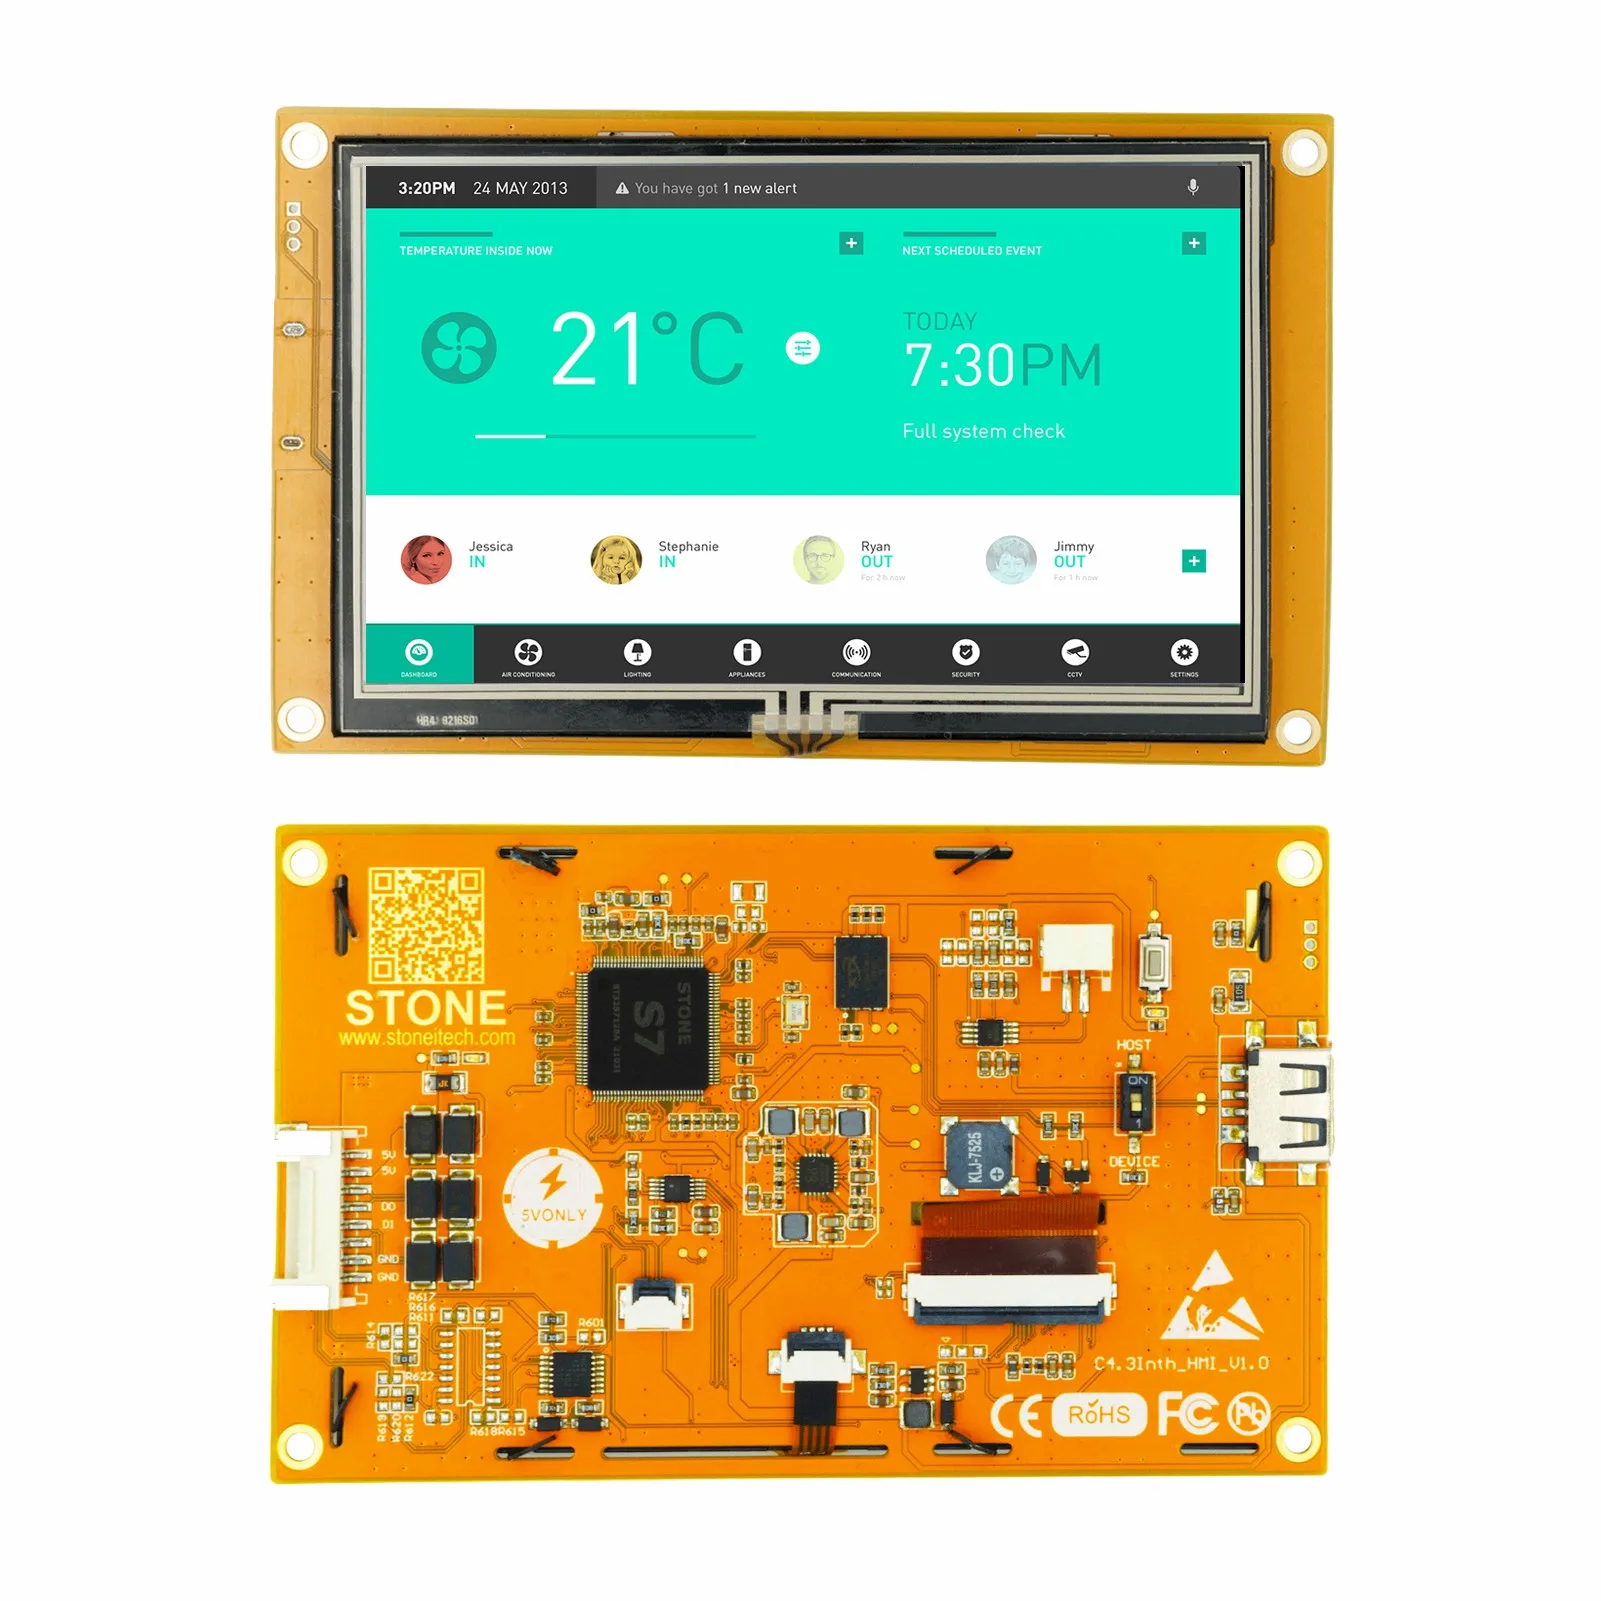 Stone 4.3Inch TFT LCD Module TFT Driver,Flash Memory,UART port,power supply and so on,the important is that it has the ready-mad